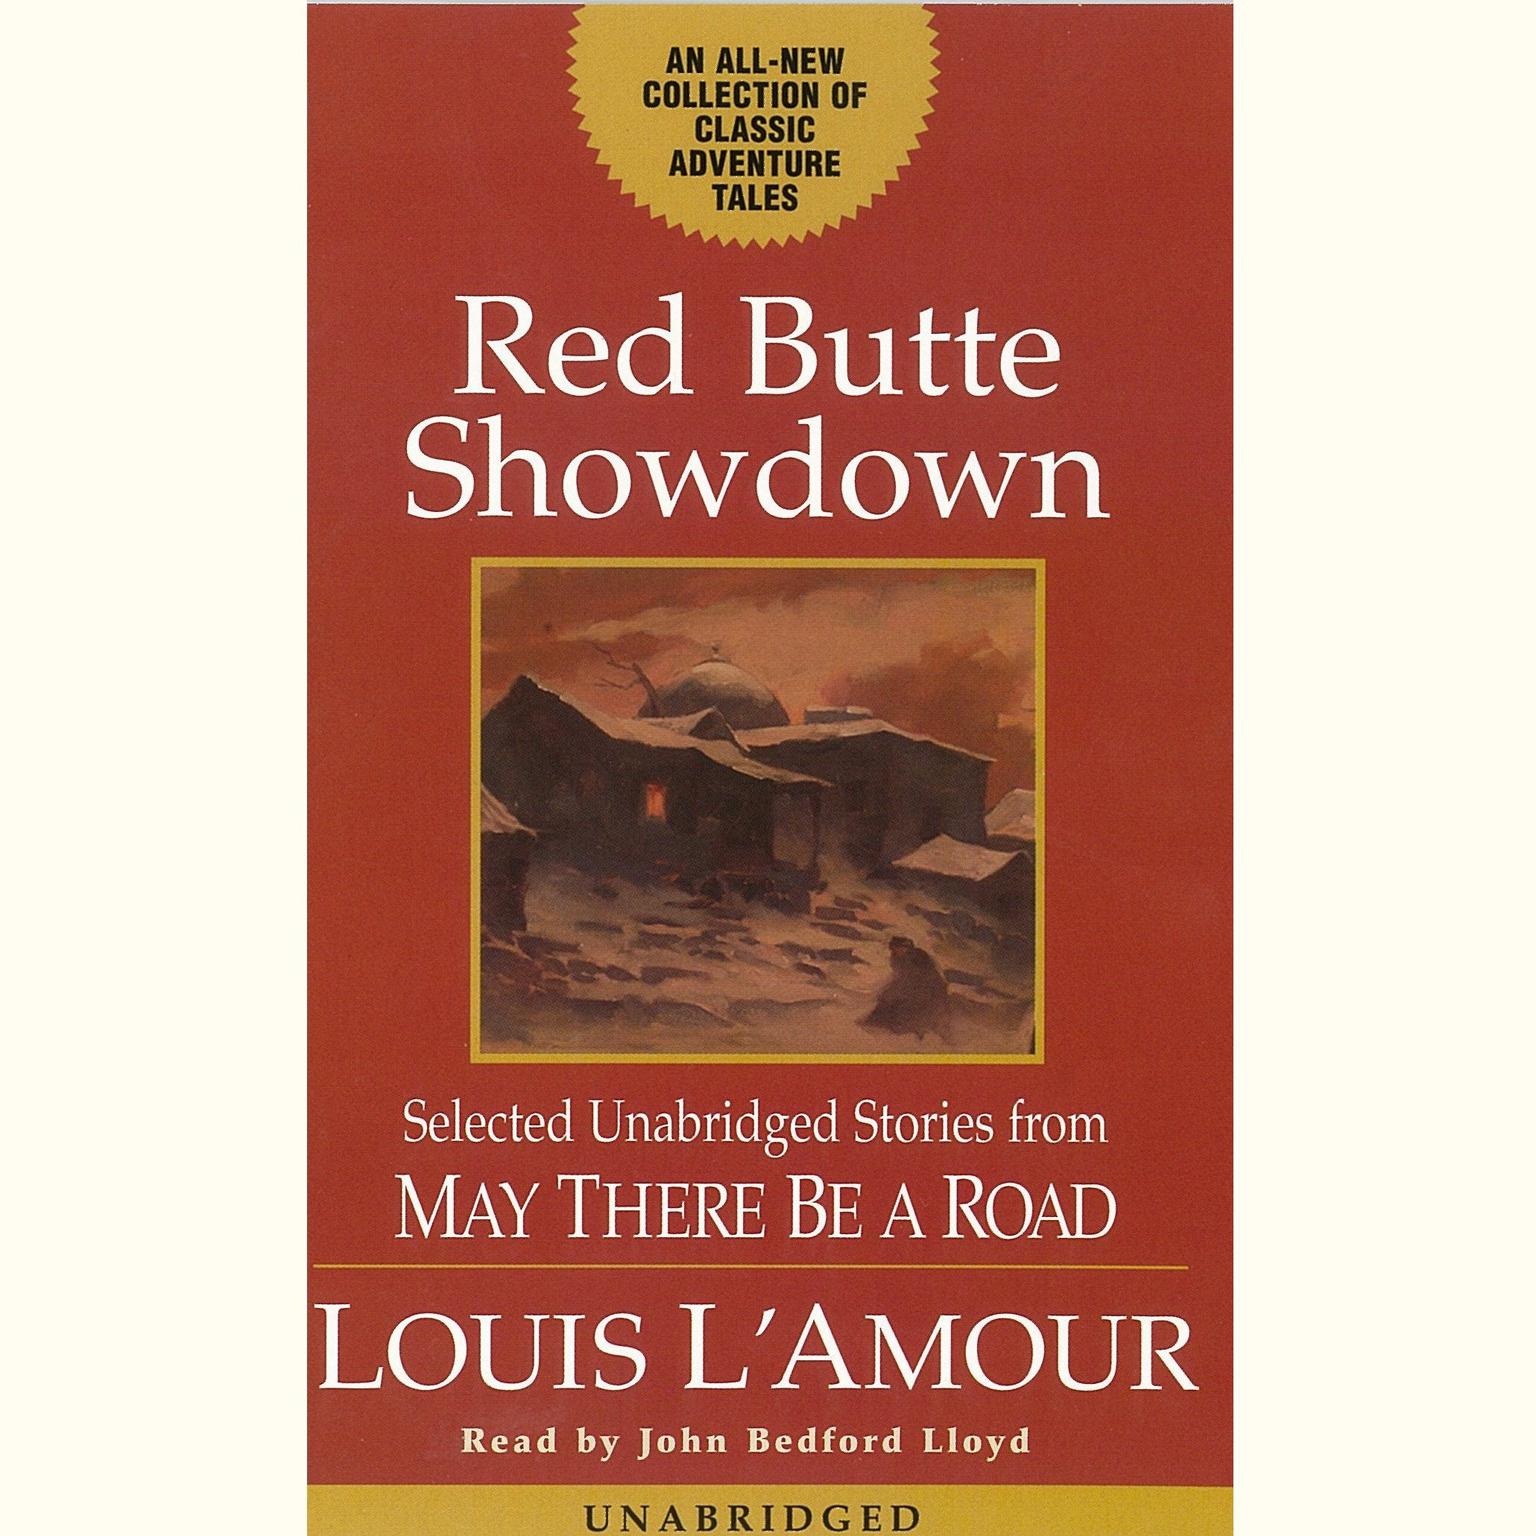 Red Butte Showdown: May There Be a Road III Audiobook, by Louis L’Amour